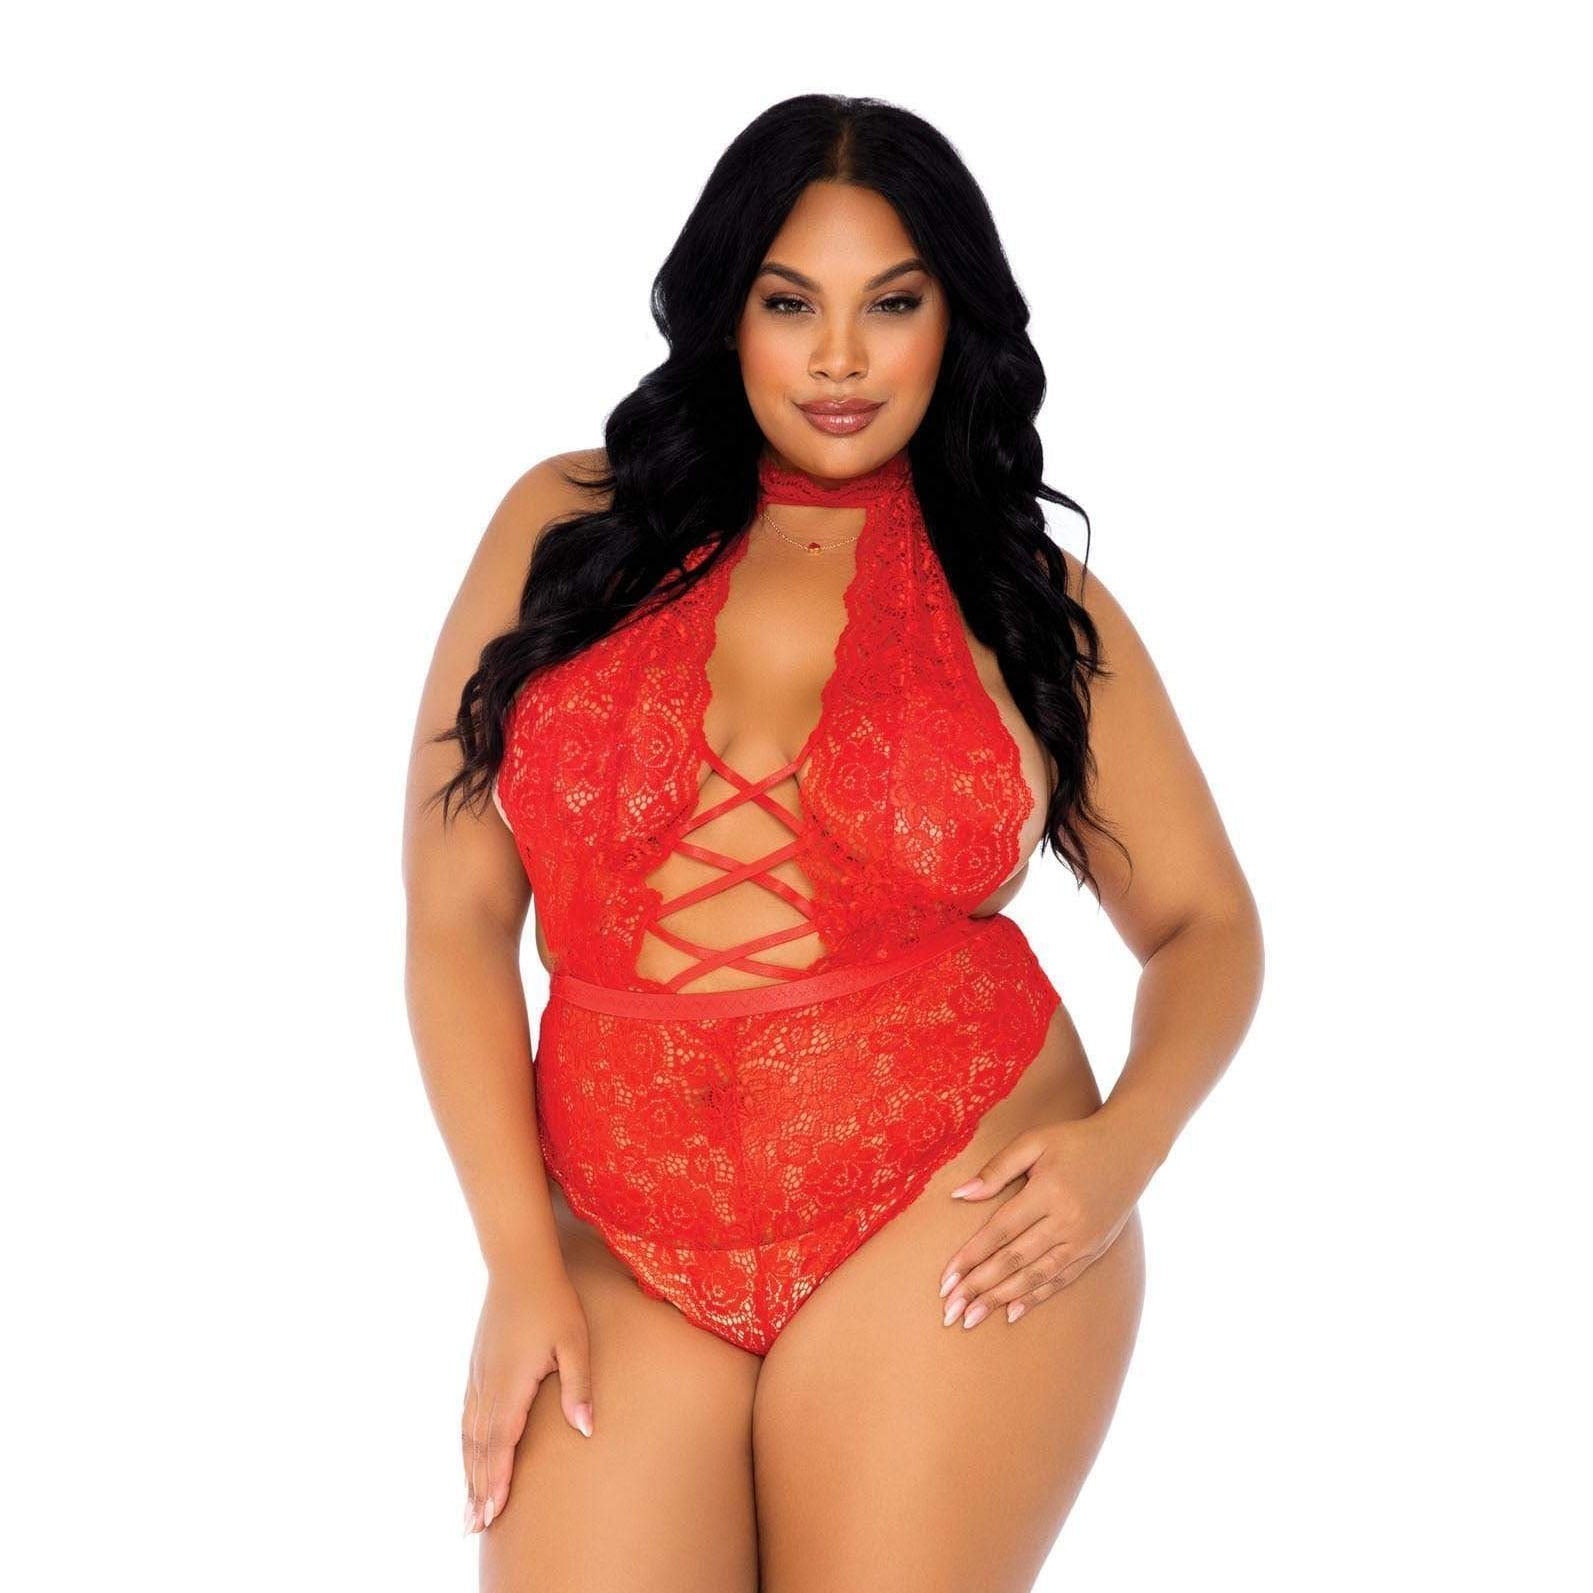 Vibrators, Sex Toy Kits and Sex Toys at Cloud9Adults - Leg Avenue Floral Lace Crotchless Teddy Red UK 18 to 22 - Buy Sex Toys Online